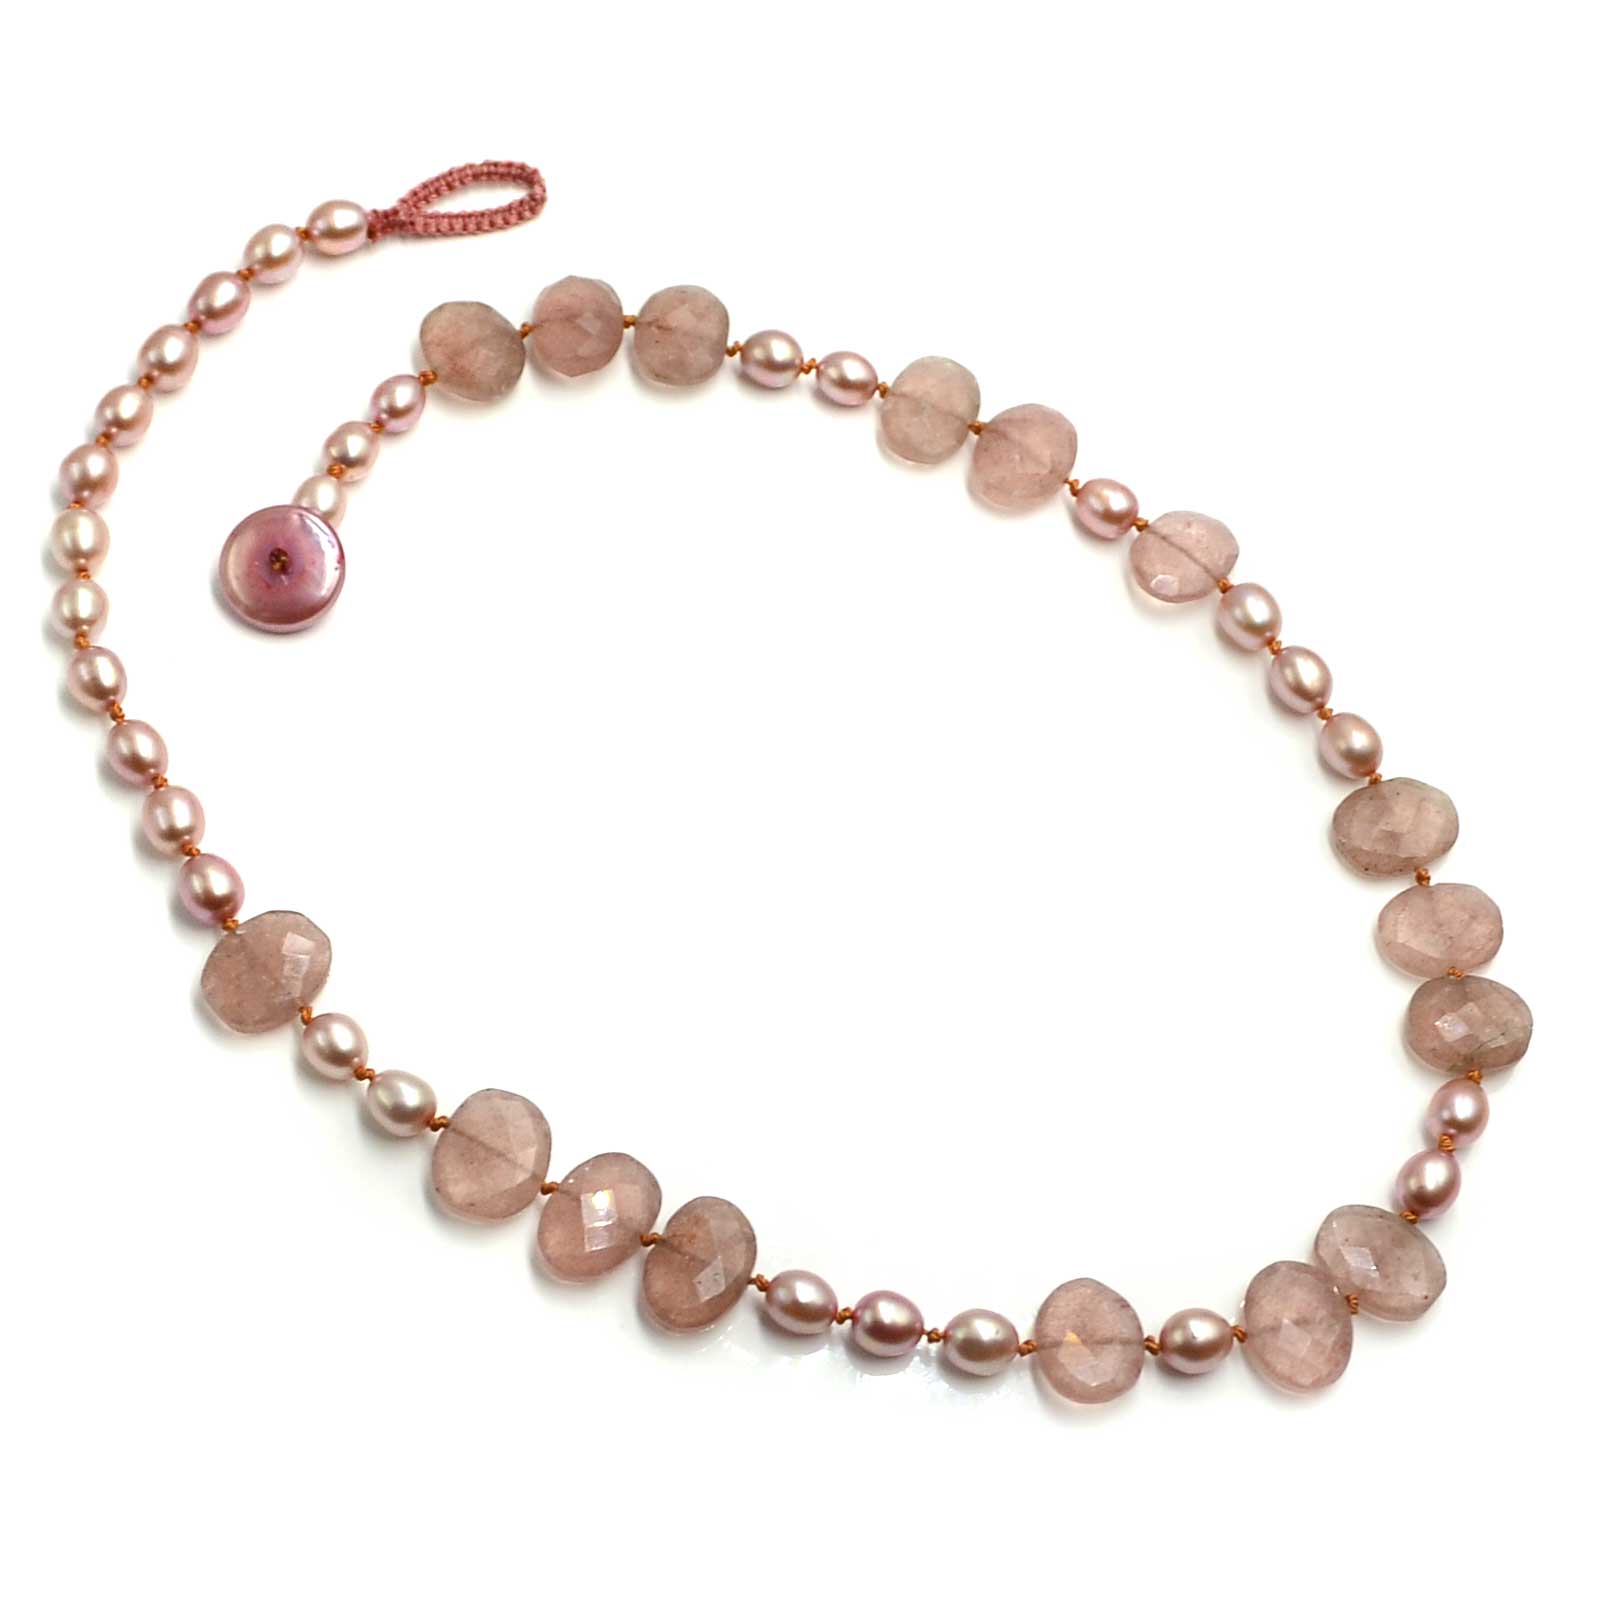 Gem And Pearl Knotting<br>10.12.22